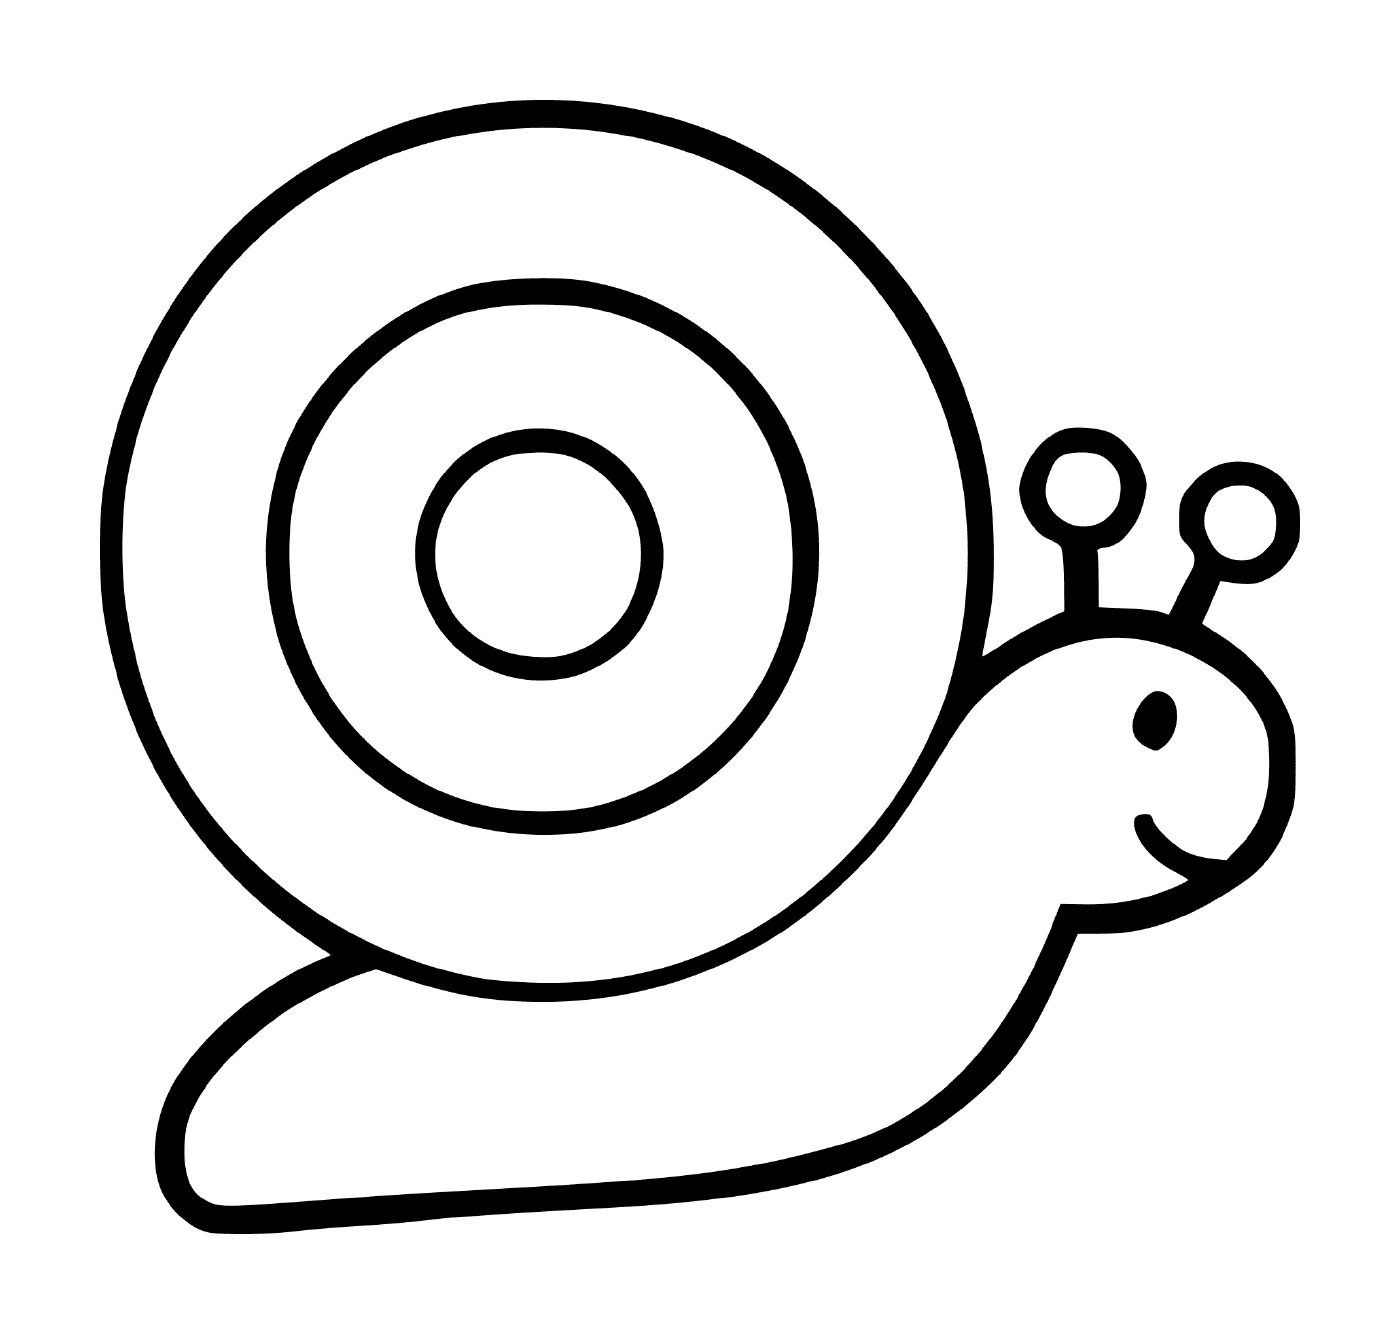  An easy to draw snail 